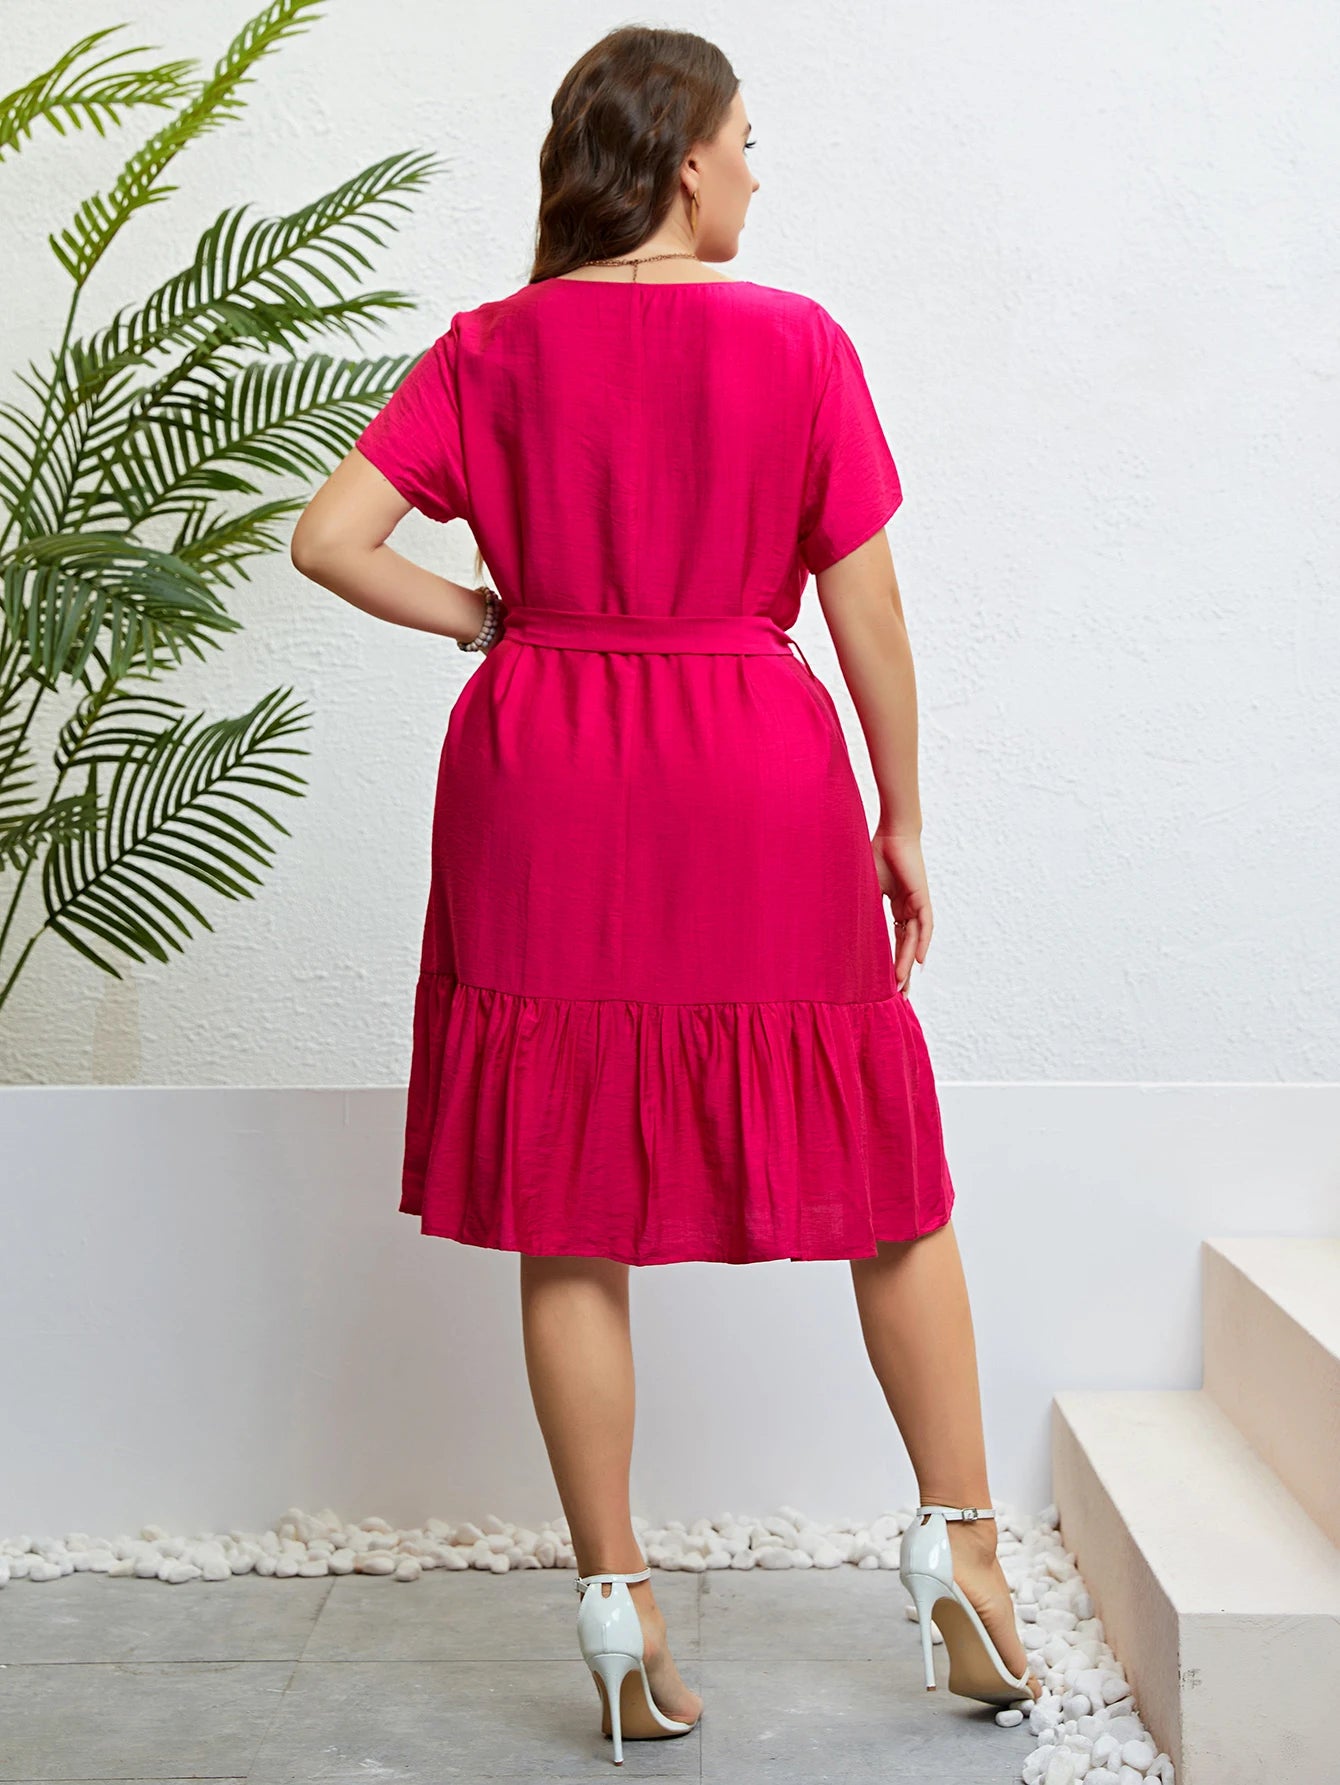 Plus Size Summer New Style Short Sleeve V-neck Solid Elegant Dress For Women Outfits Casual A-line Party Large Size Midi Dresses